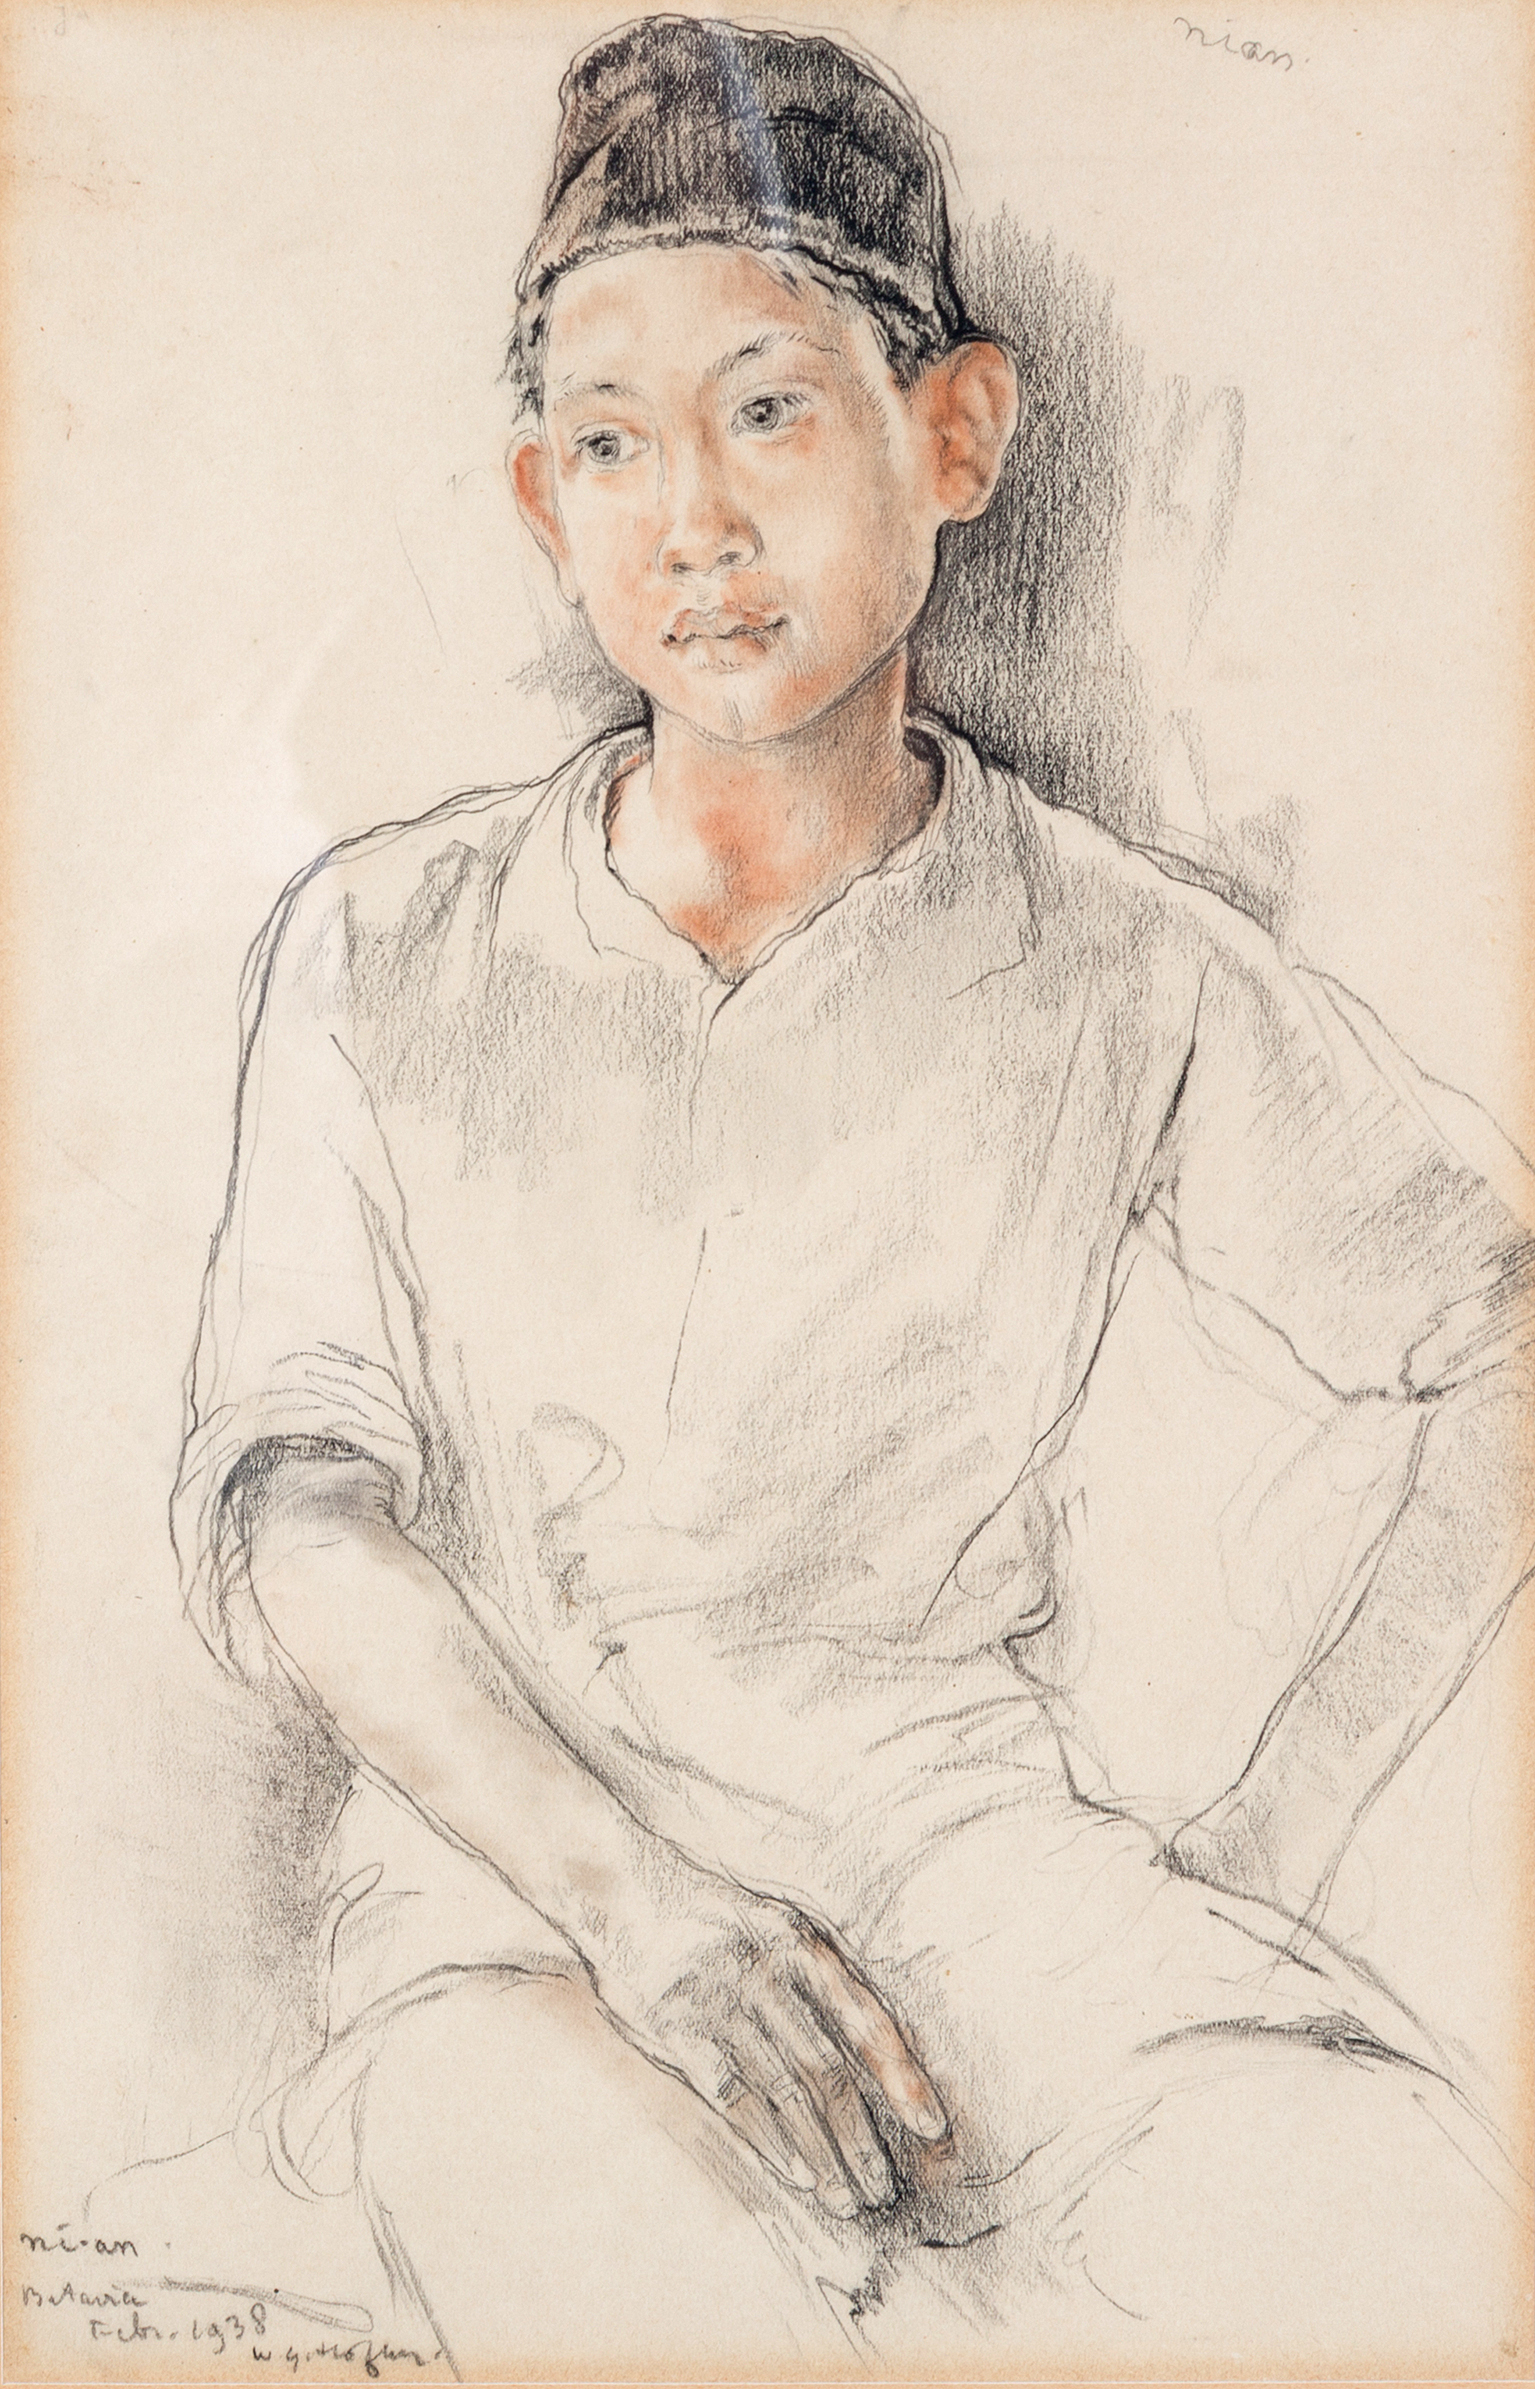 'Nian', portrait of this young Javanese boy from Batavia